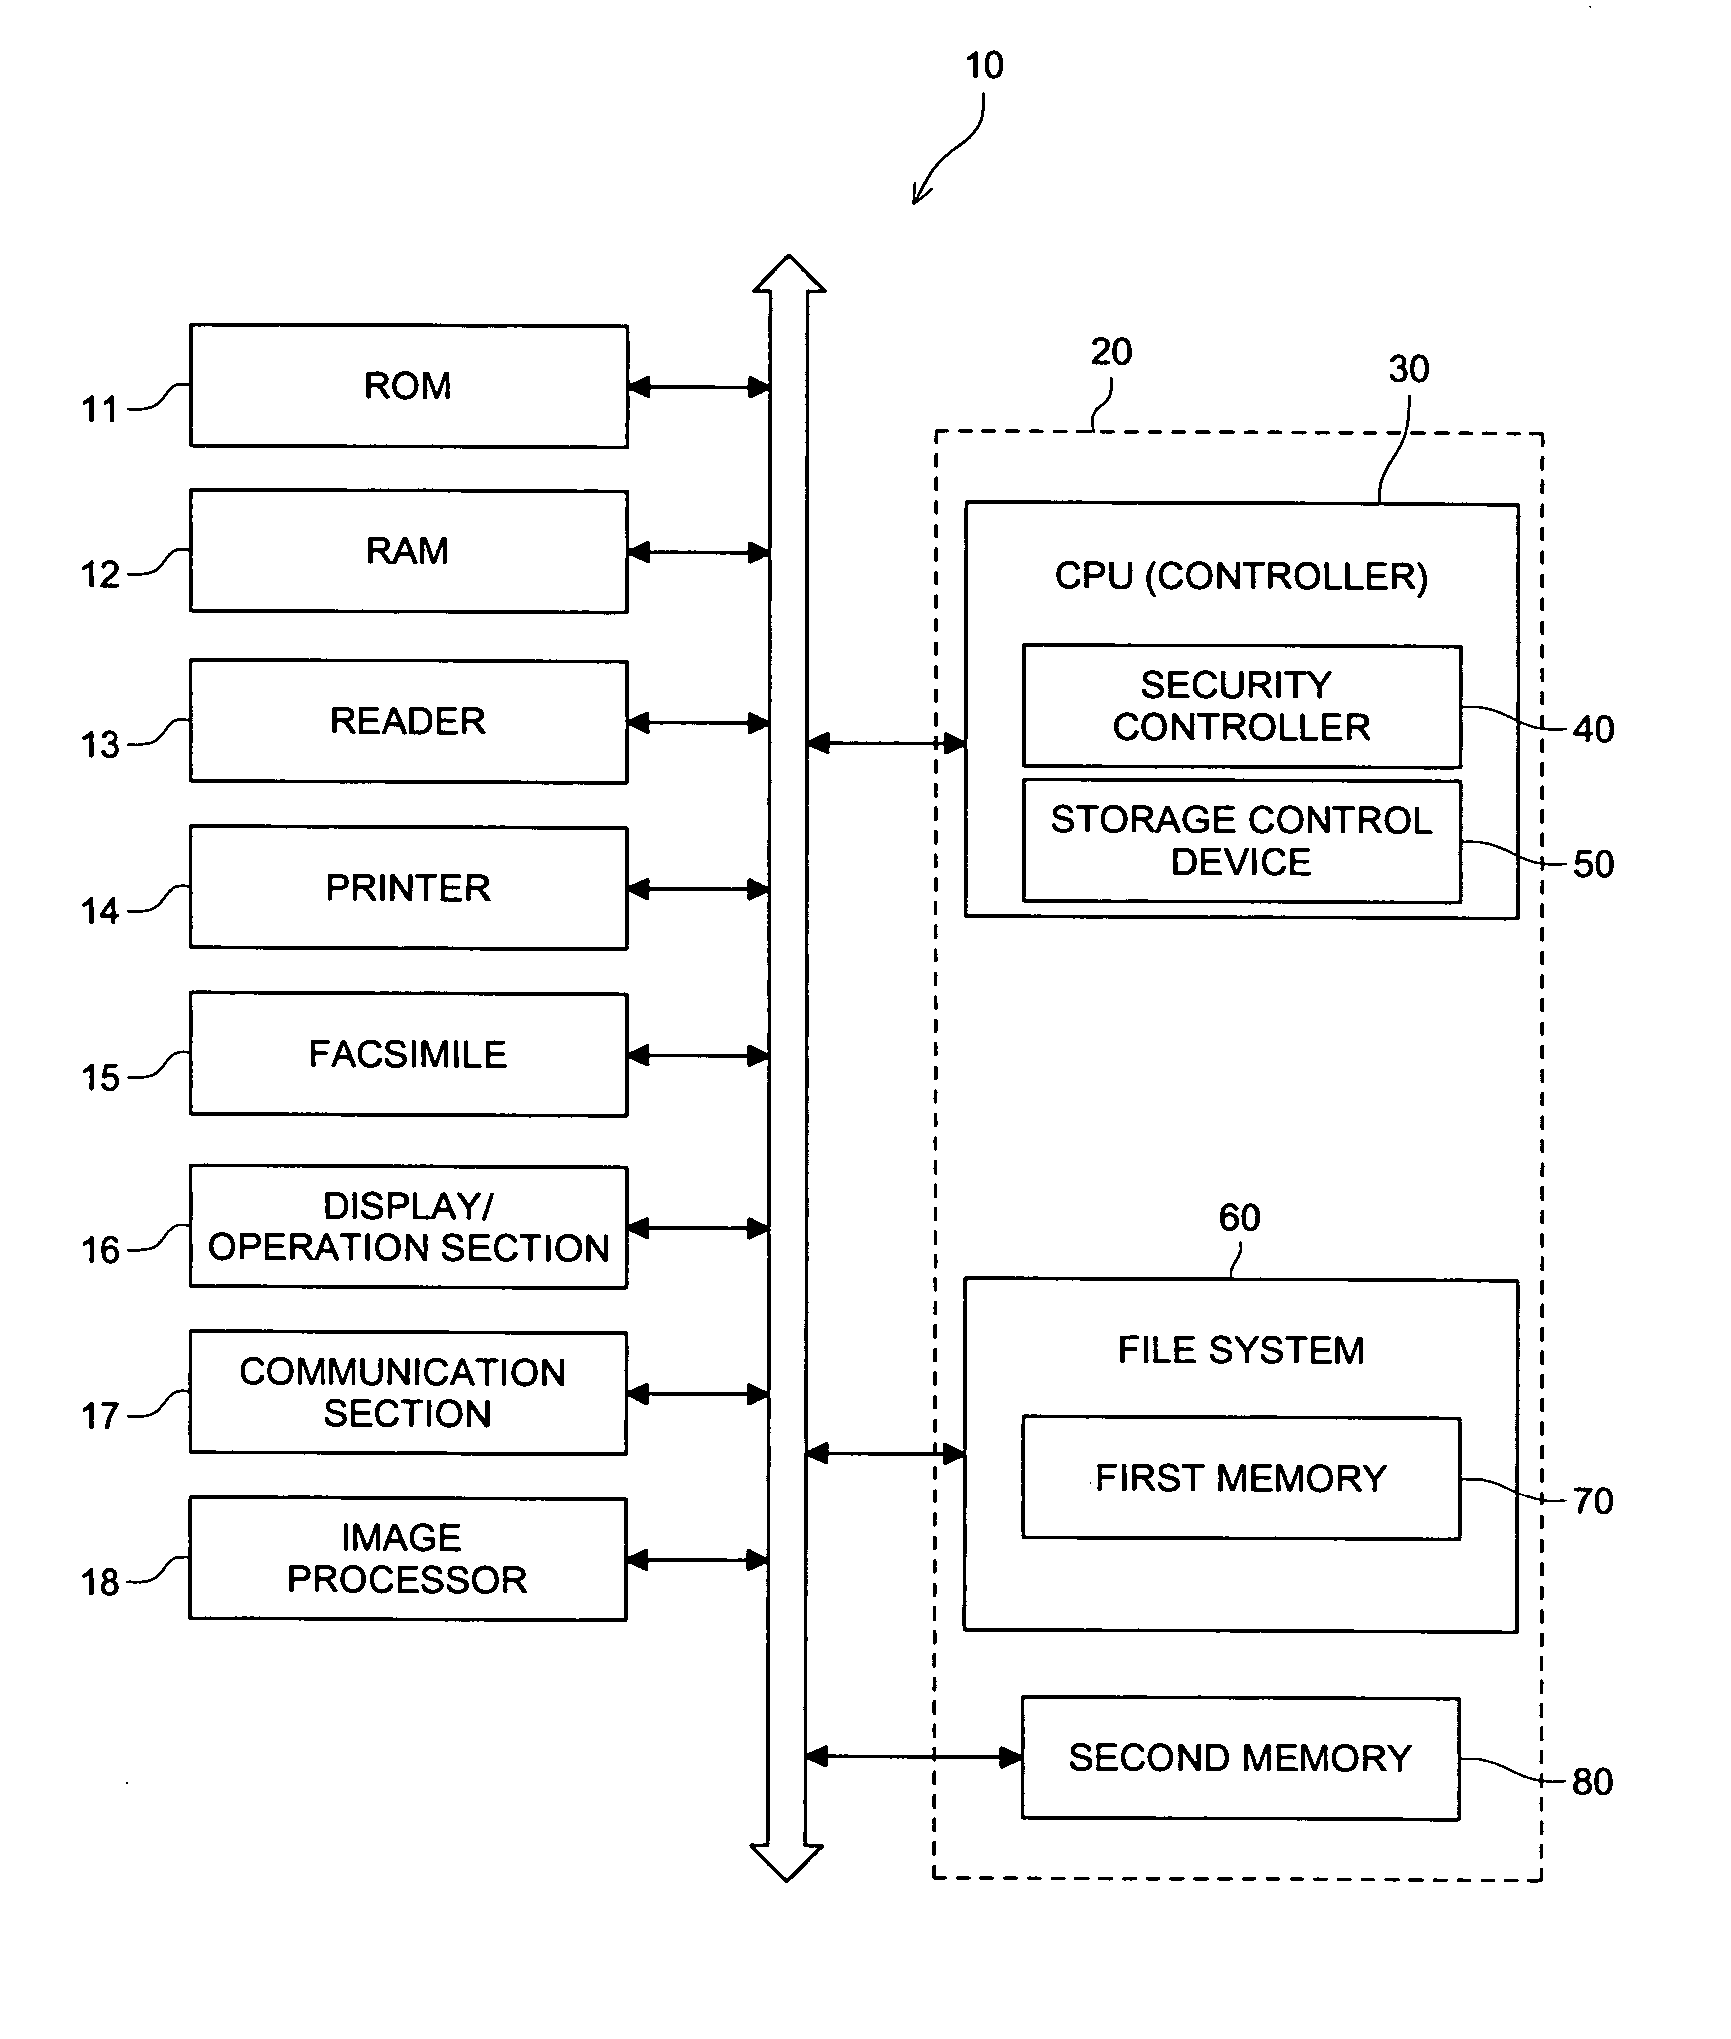 Access log storage system and digital multi-function apparatus